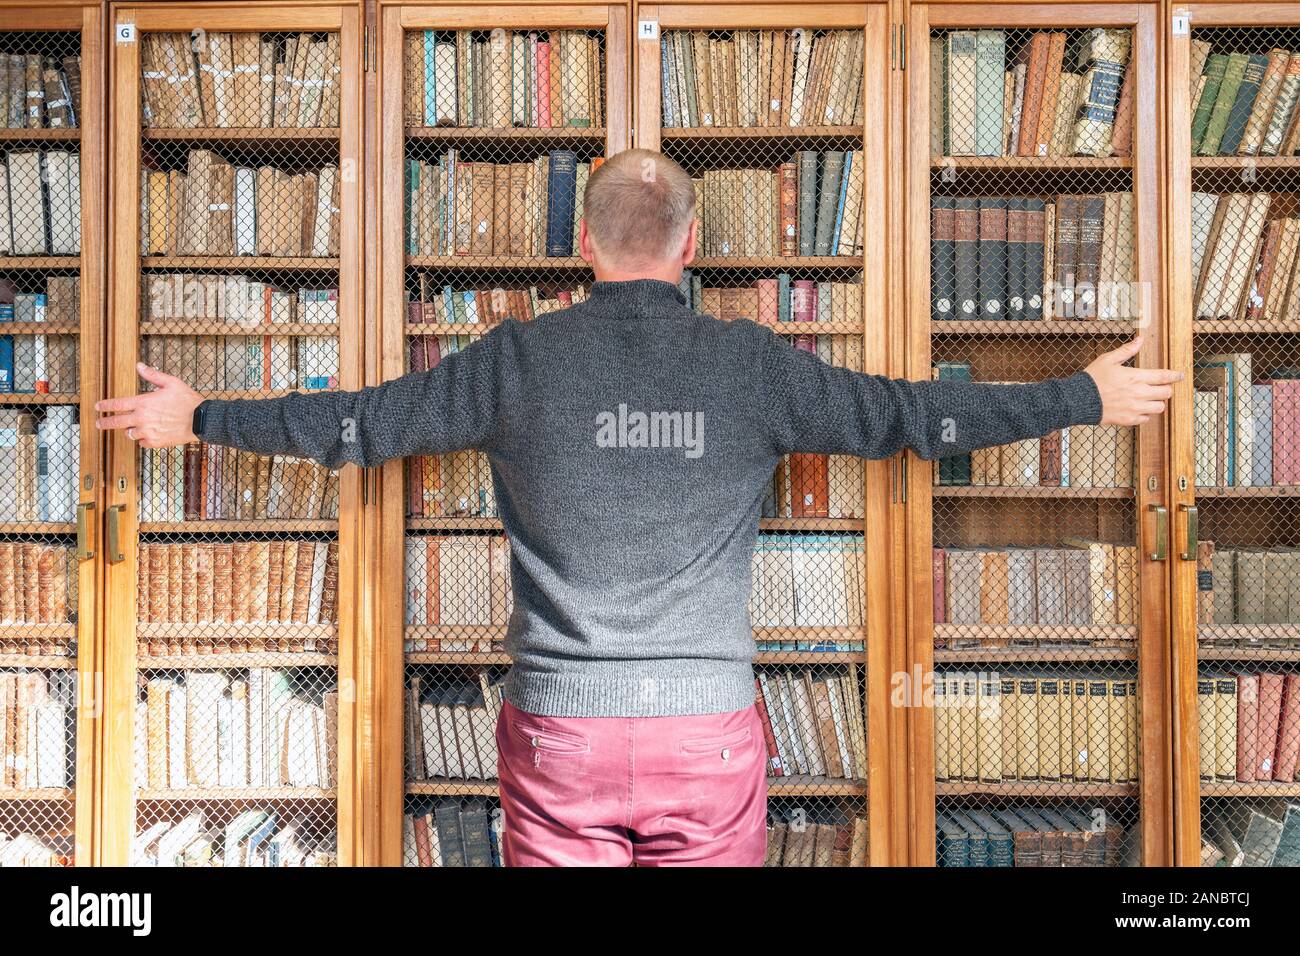 Man trying to grab the knowledge from the books on the bookshelves Stock Photo